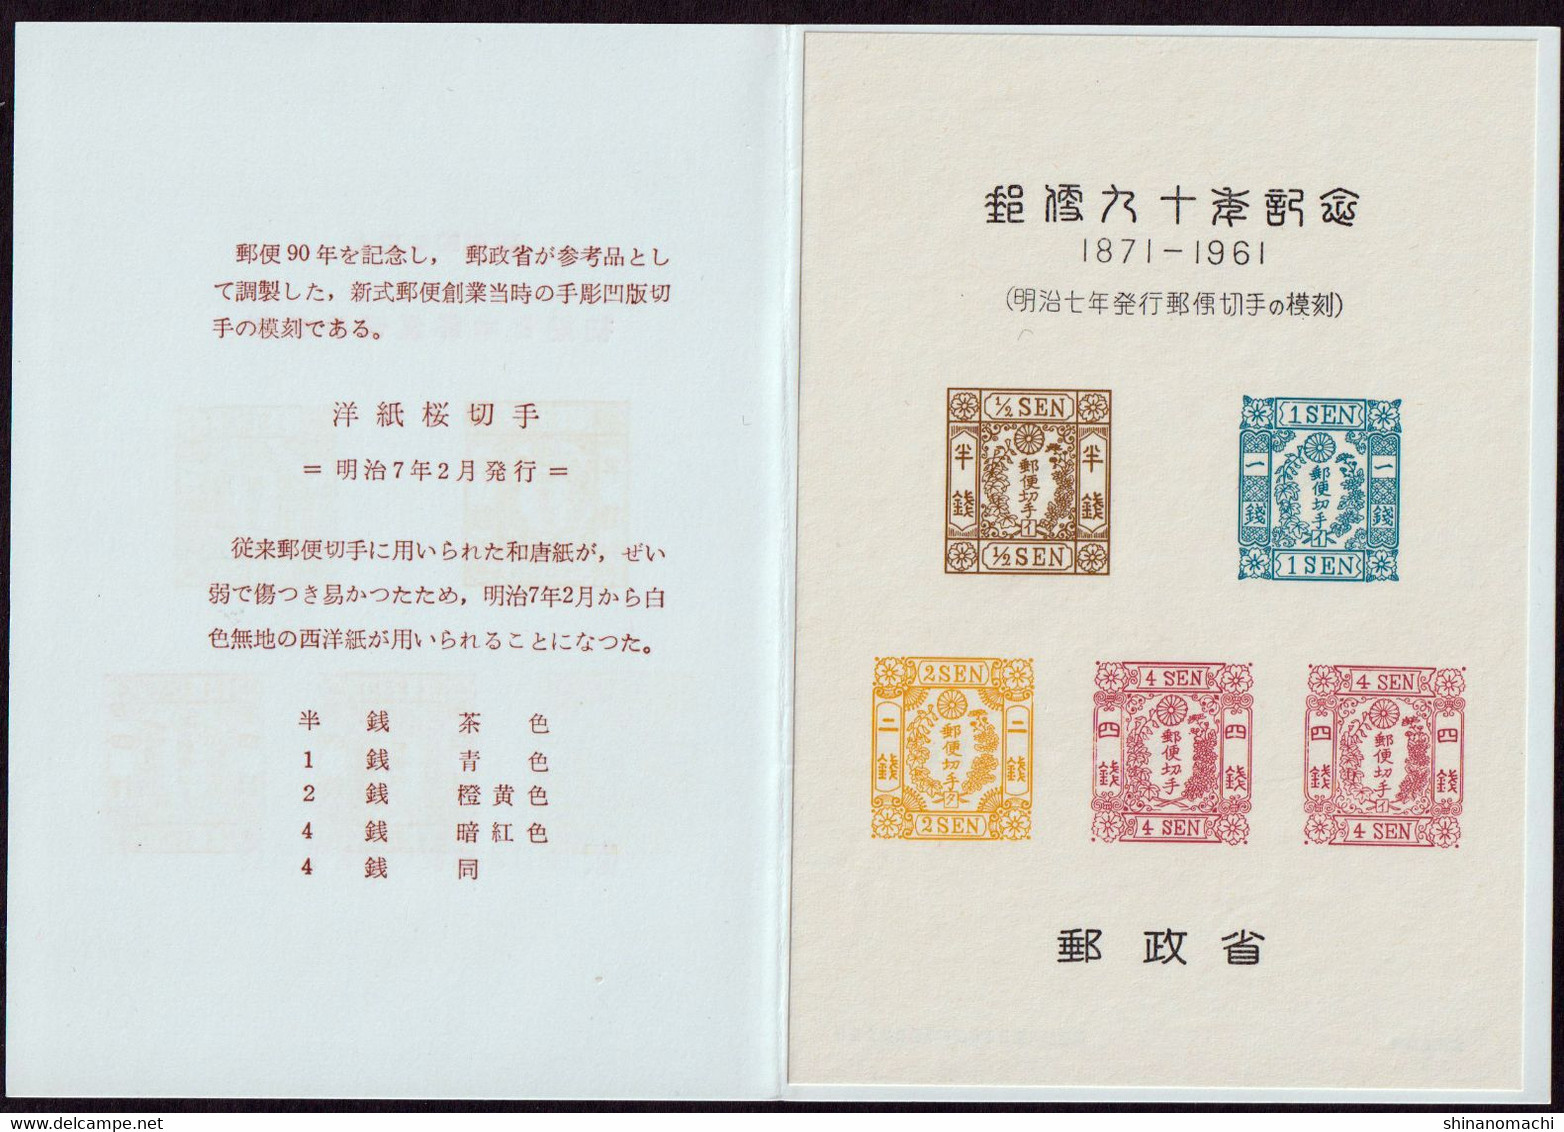 Japan - 1961-1963 - 90th anniversary of postal service 1st to 10th set of all types (with inscription & tower)